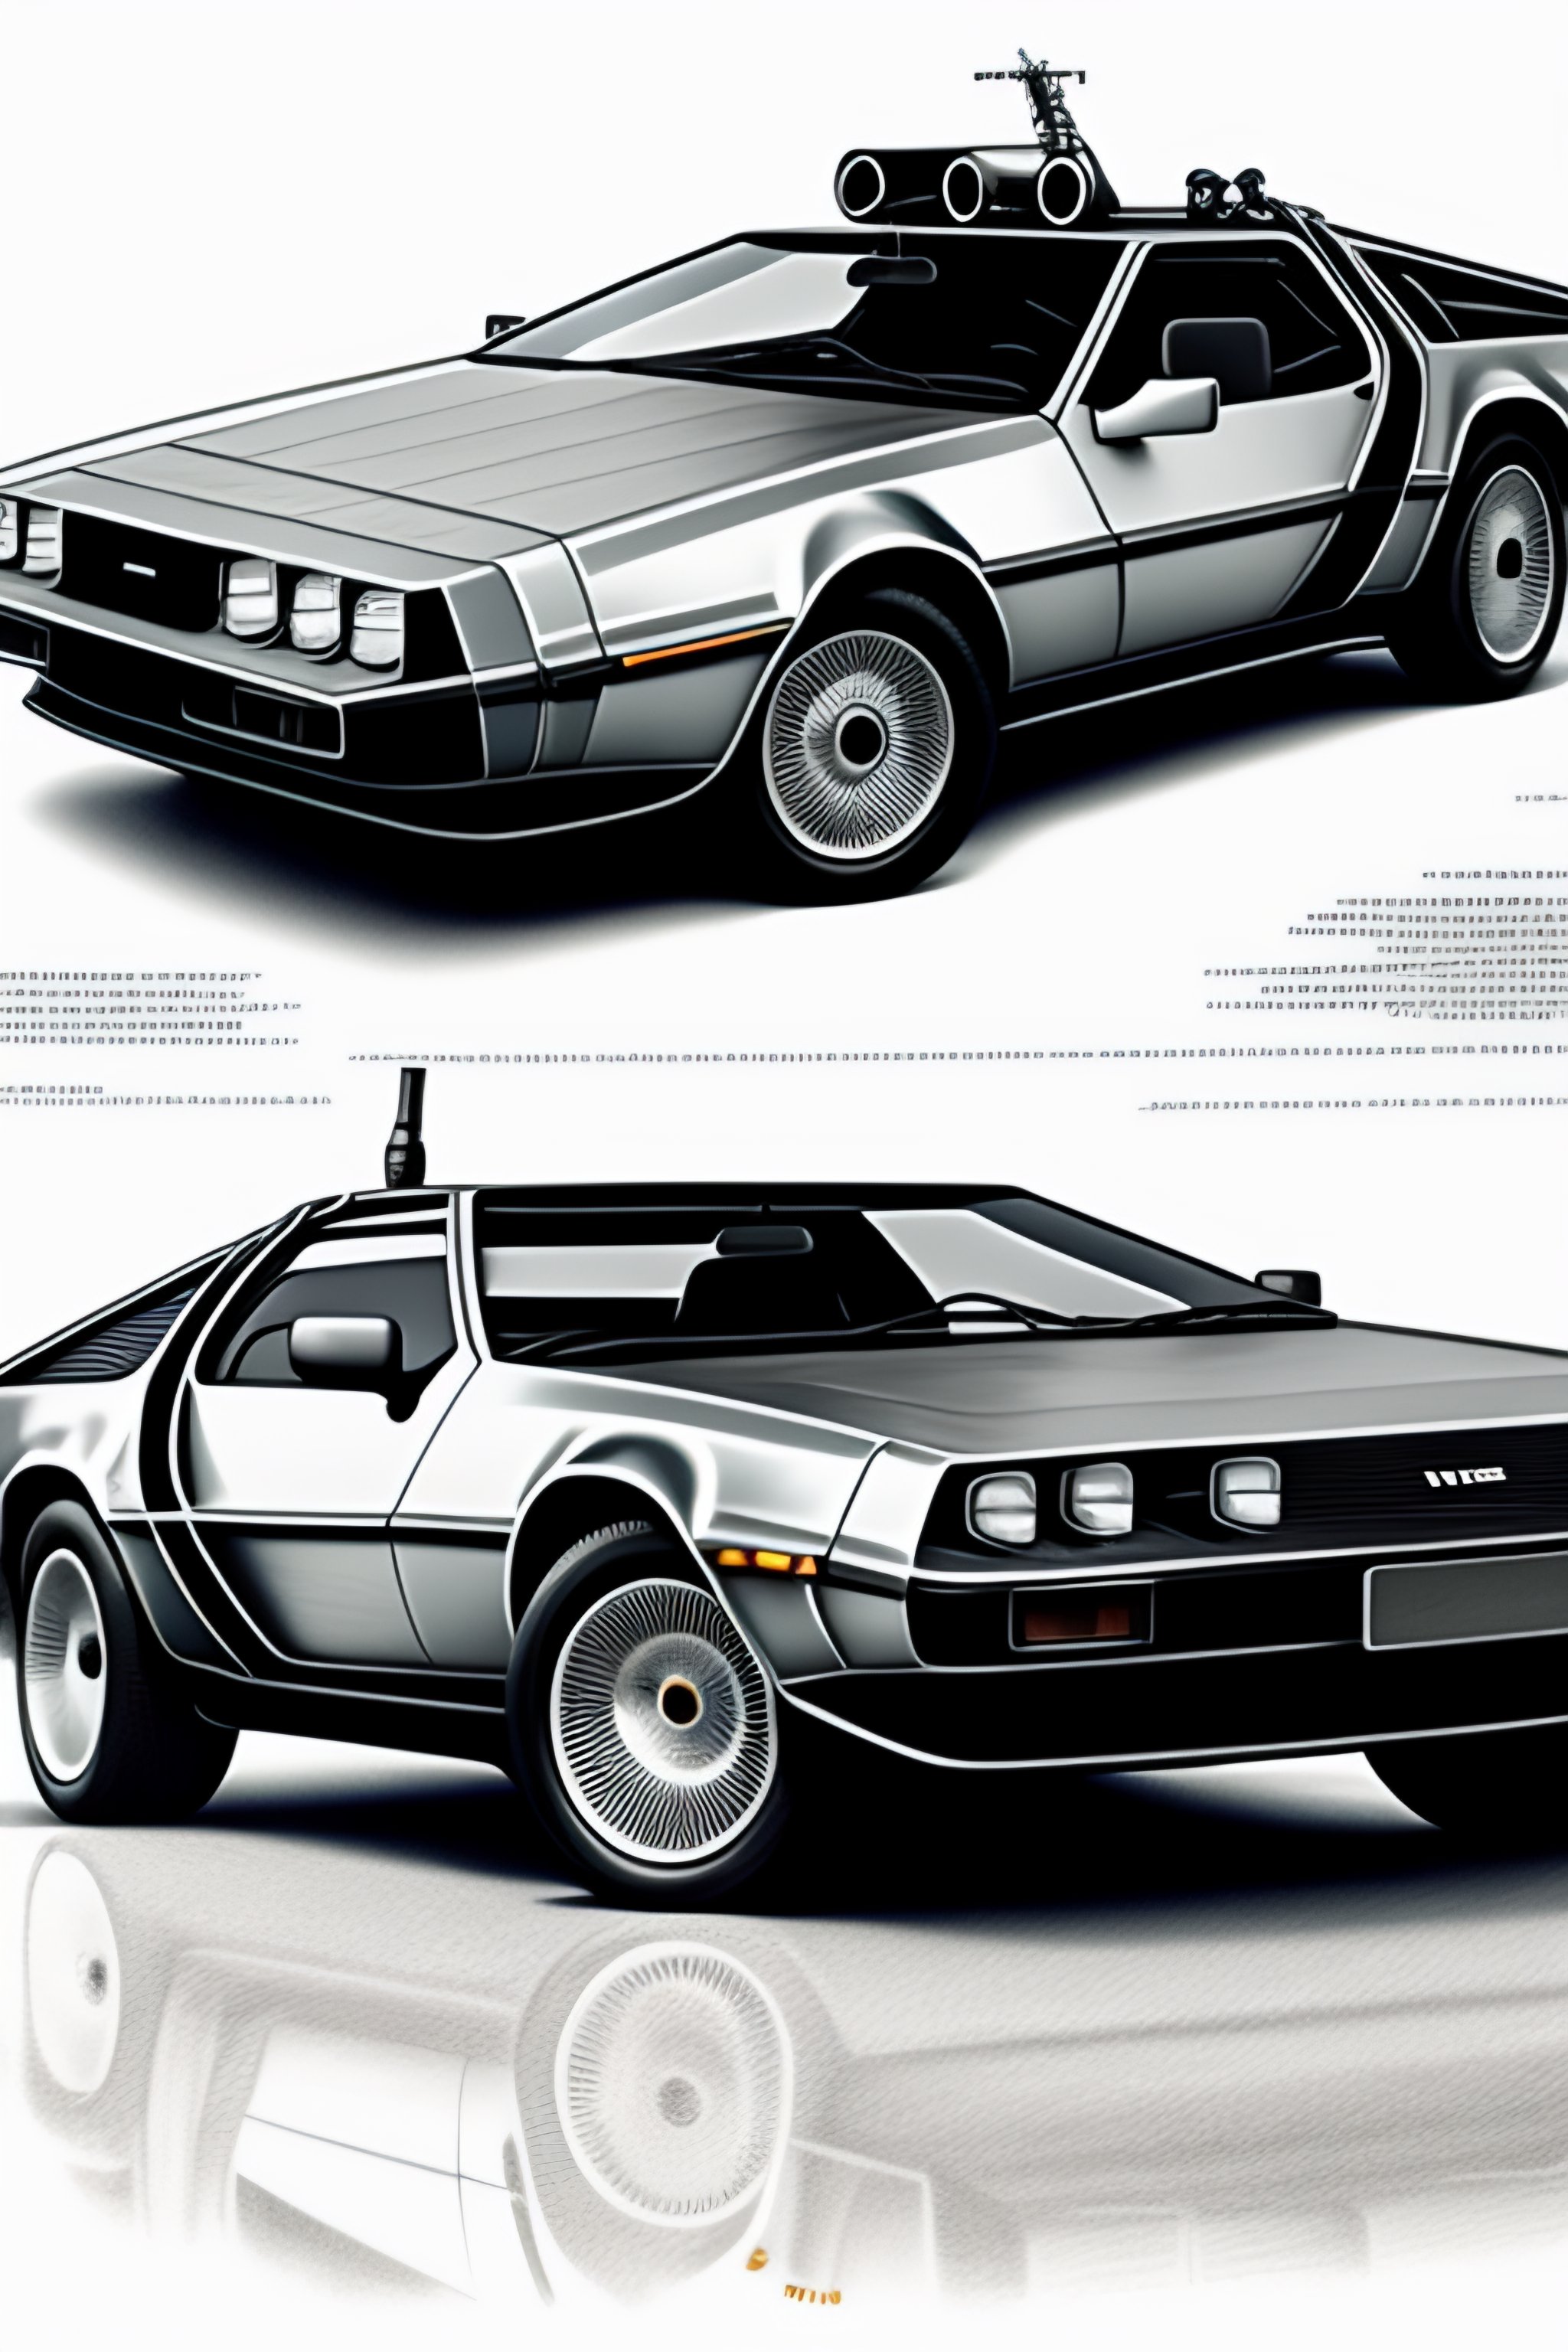 Lexica - Delorean time machine very detailed drawing blueprints